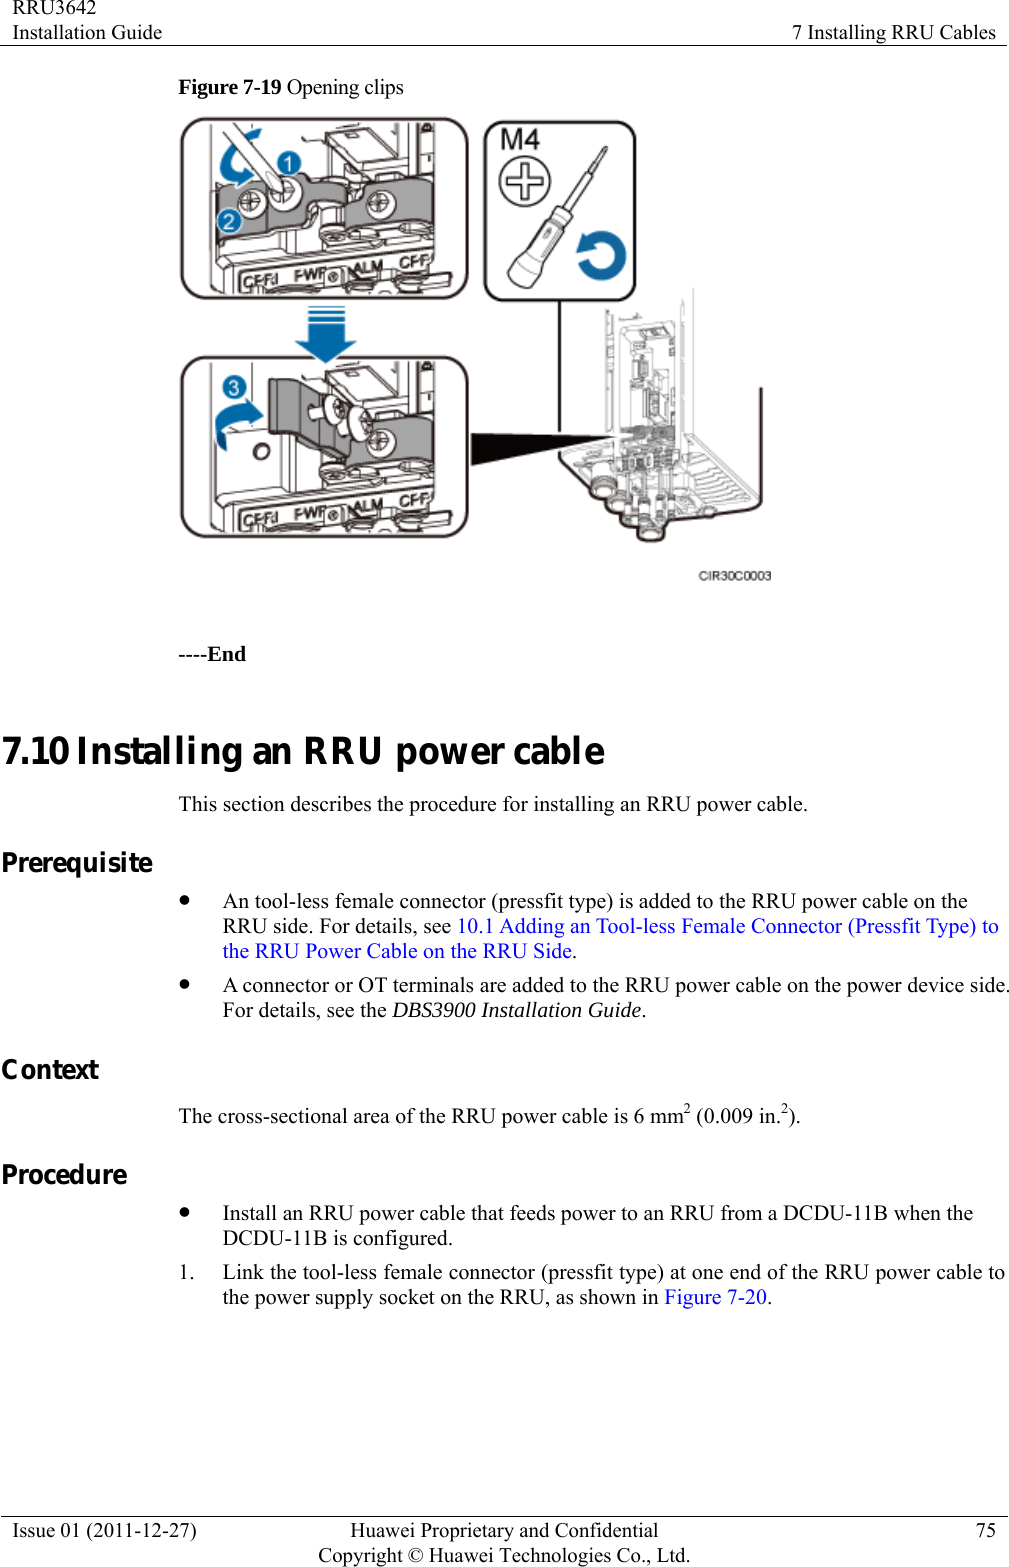 RRU3642 Installation Guide  7 Installing RRU Cables Issue 01 (2011-12-27)  Huawei Proprietary and Confidential         Copyright © Huawei Technologies Co., Ltd.75 Figure 7-19 Opening clips   ----End 7.10 Installing an RRU power cable This section describes the procedure for installing an RRU power cable. Prerequisite z An tool-less female connector (pressfit type) is added to the RRU power cable on the RRU side. For details, see 10.1 Adding an Tool-less Female Connector (Pressfit Type) to the RRU Power Cable on the RRU Side. z A connector or OT terminals are added to the RRU power cable on the power device side. For details, see the DBS3900 Installation Guide. Context The cross-sectional area of the RRU power cable is 6 mm2 (0.009 in.2). Procedure z Install an RRU power cable that feeds power to an RRU from a DCDU-11B when the DCDU-11B is configured. 1. Link the tool-less female connector (pressfit type) at one end of the RRU power cable to the power supply socket on the RRU, as shown in Figure 7-20.  